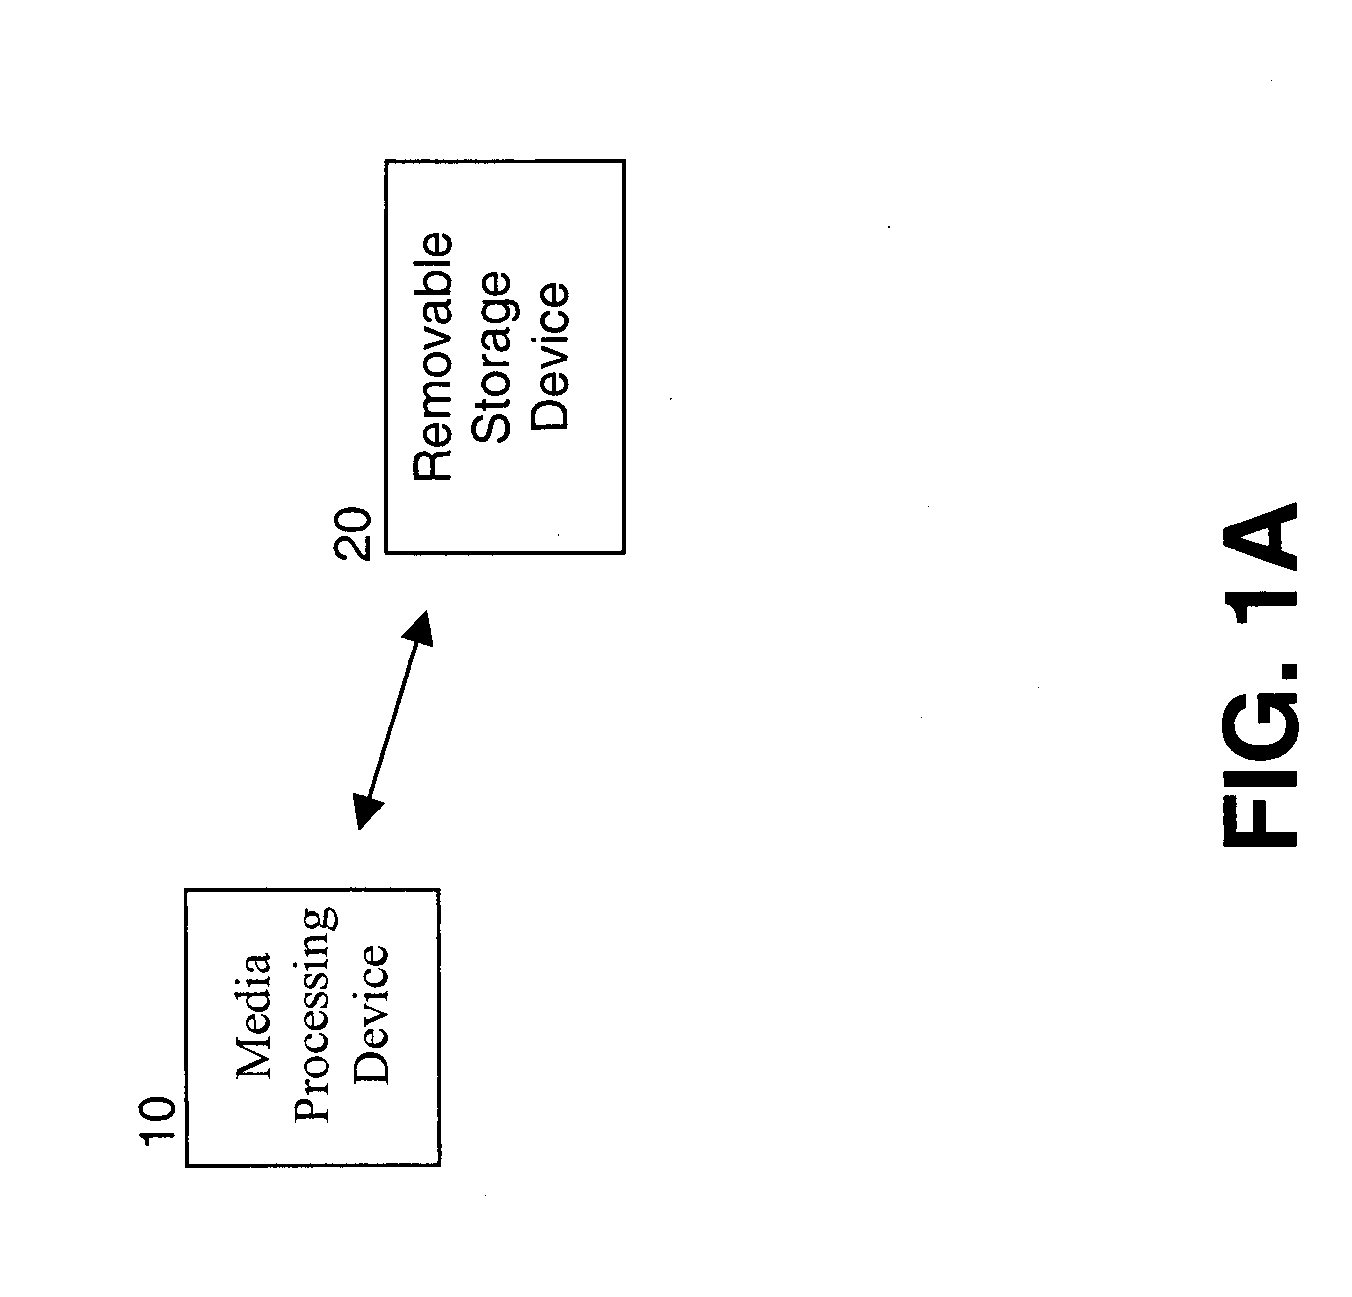 Removable storage device with code to allow change detection